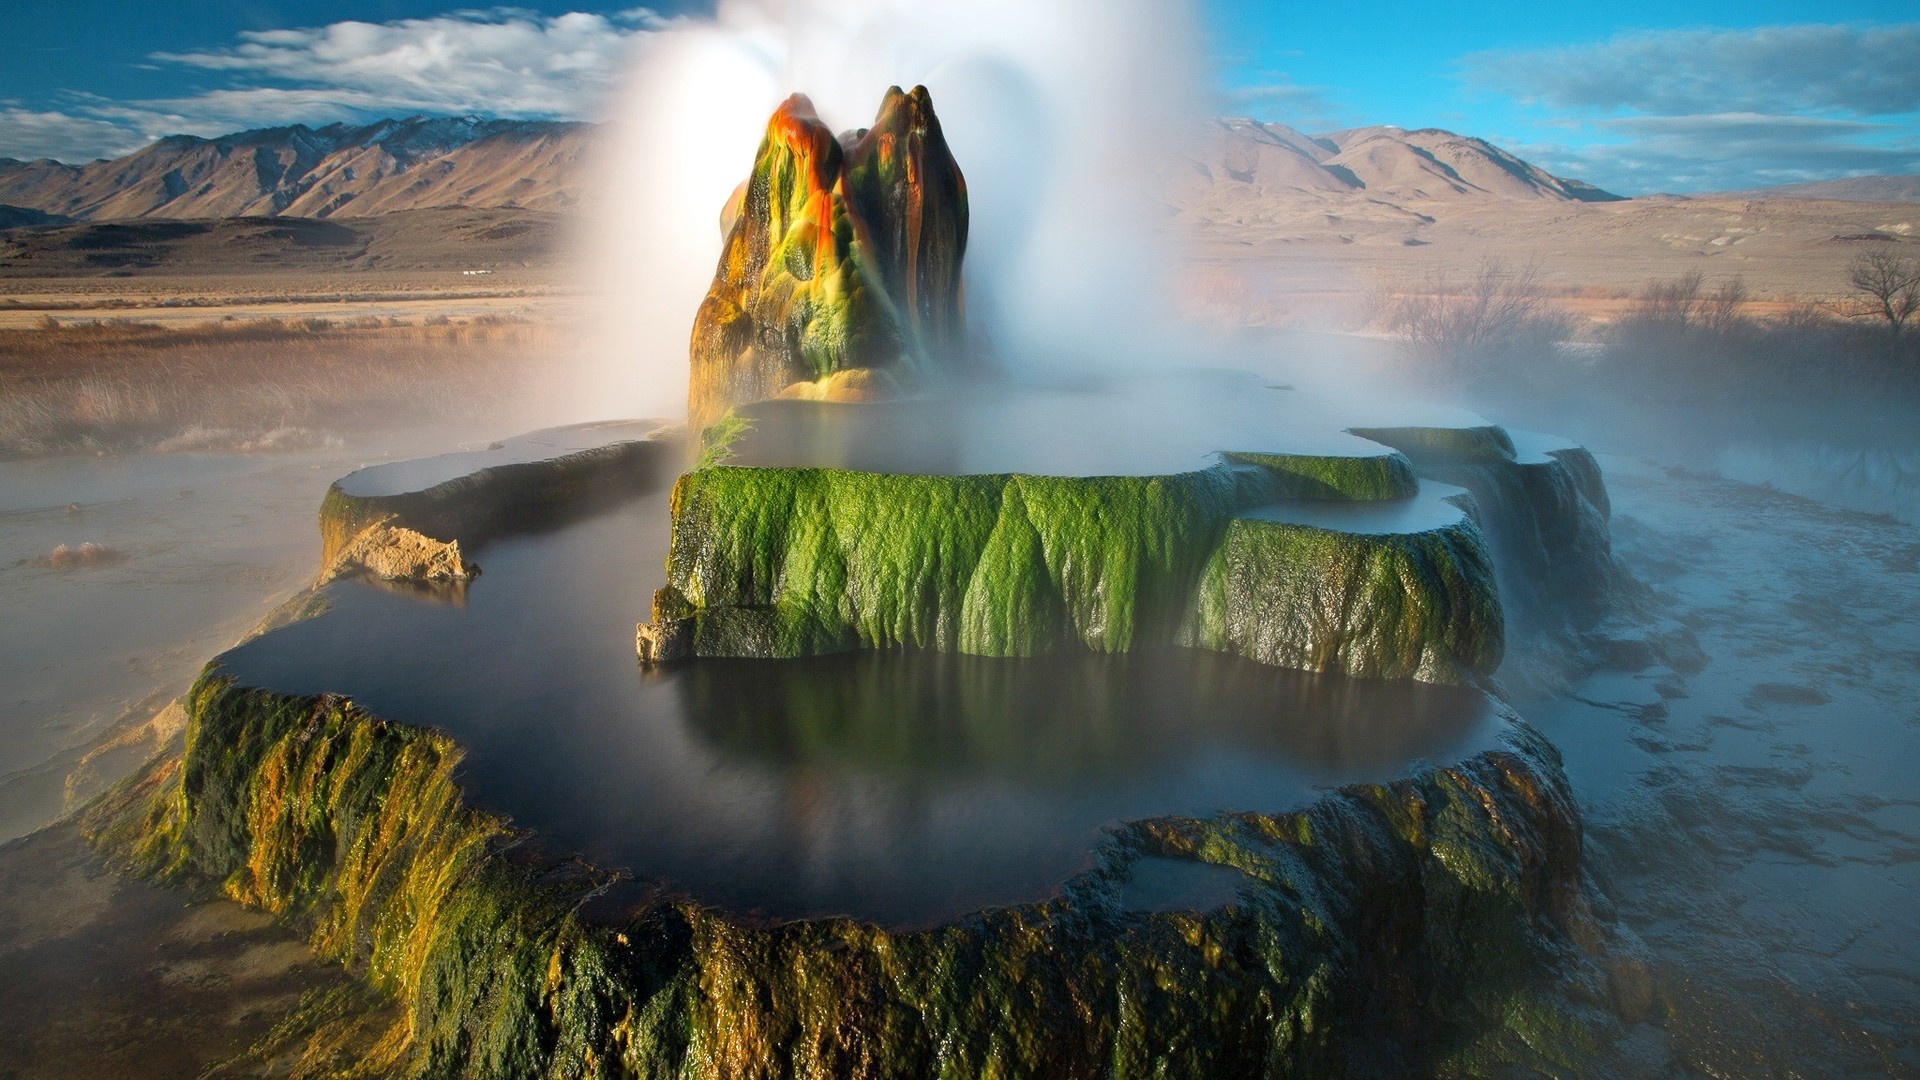 Nature landscape, Mountains clouds, Nevada USA, Geysers water, 1920x1080 Full HD Desktop